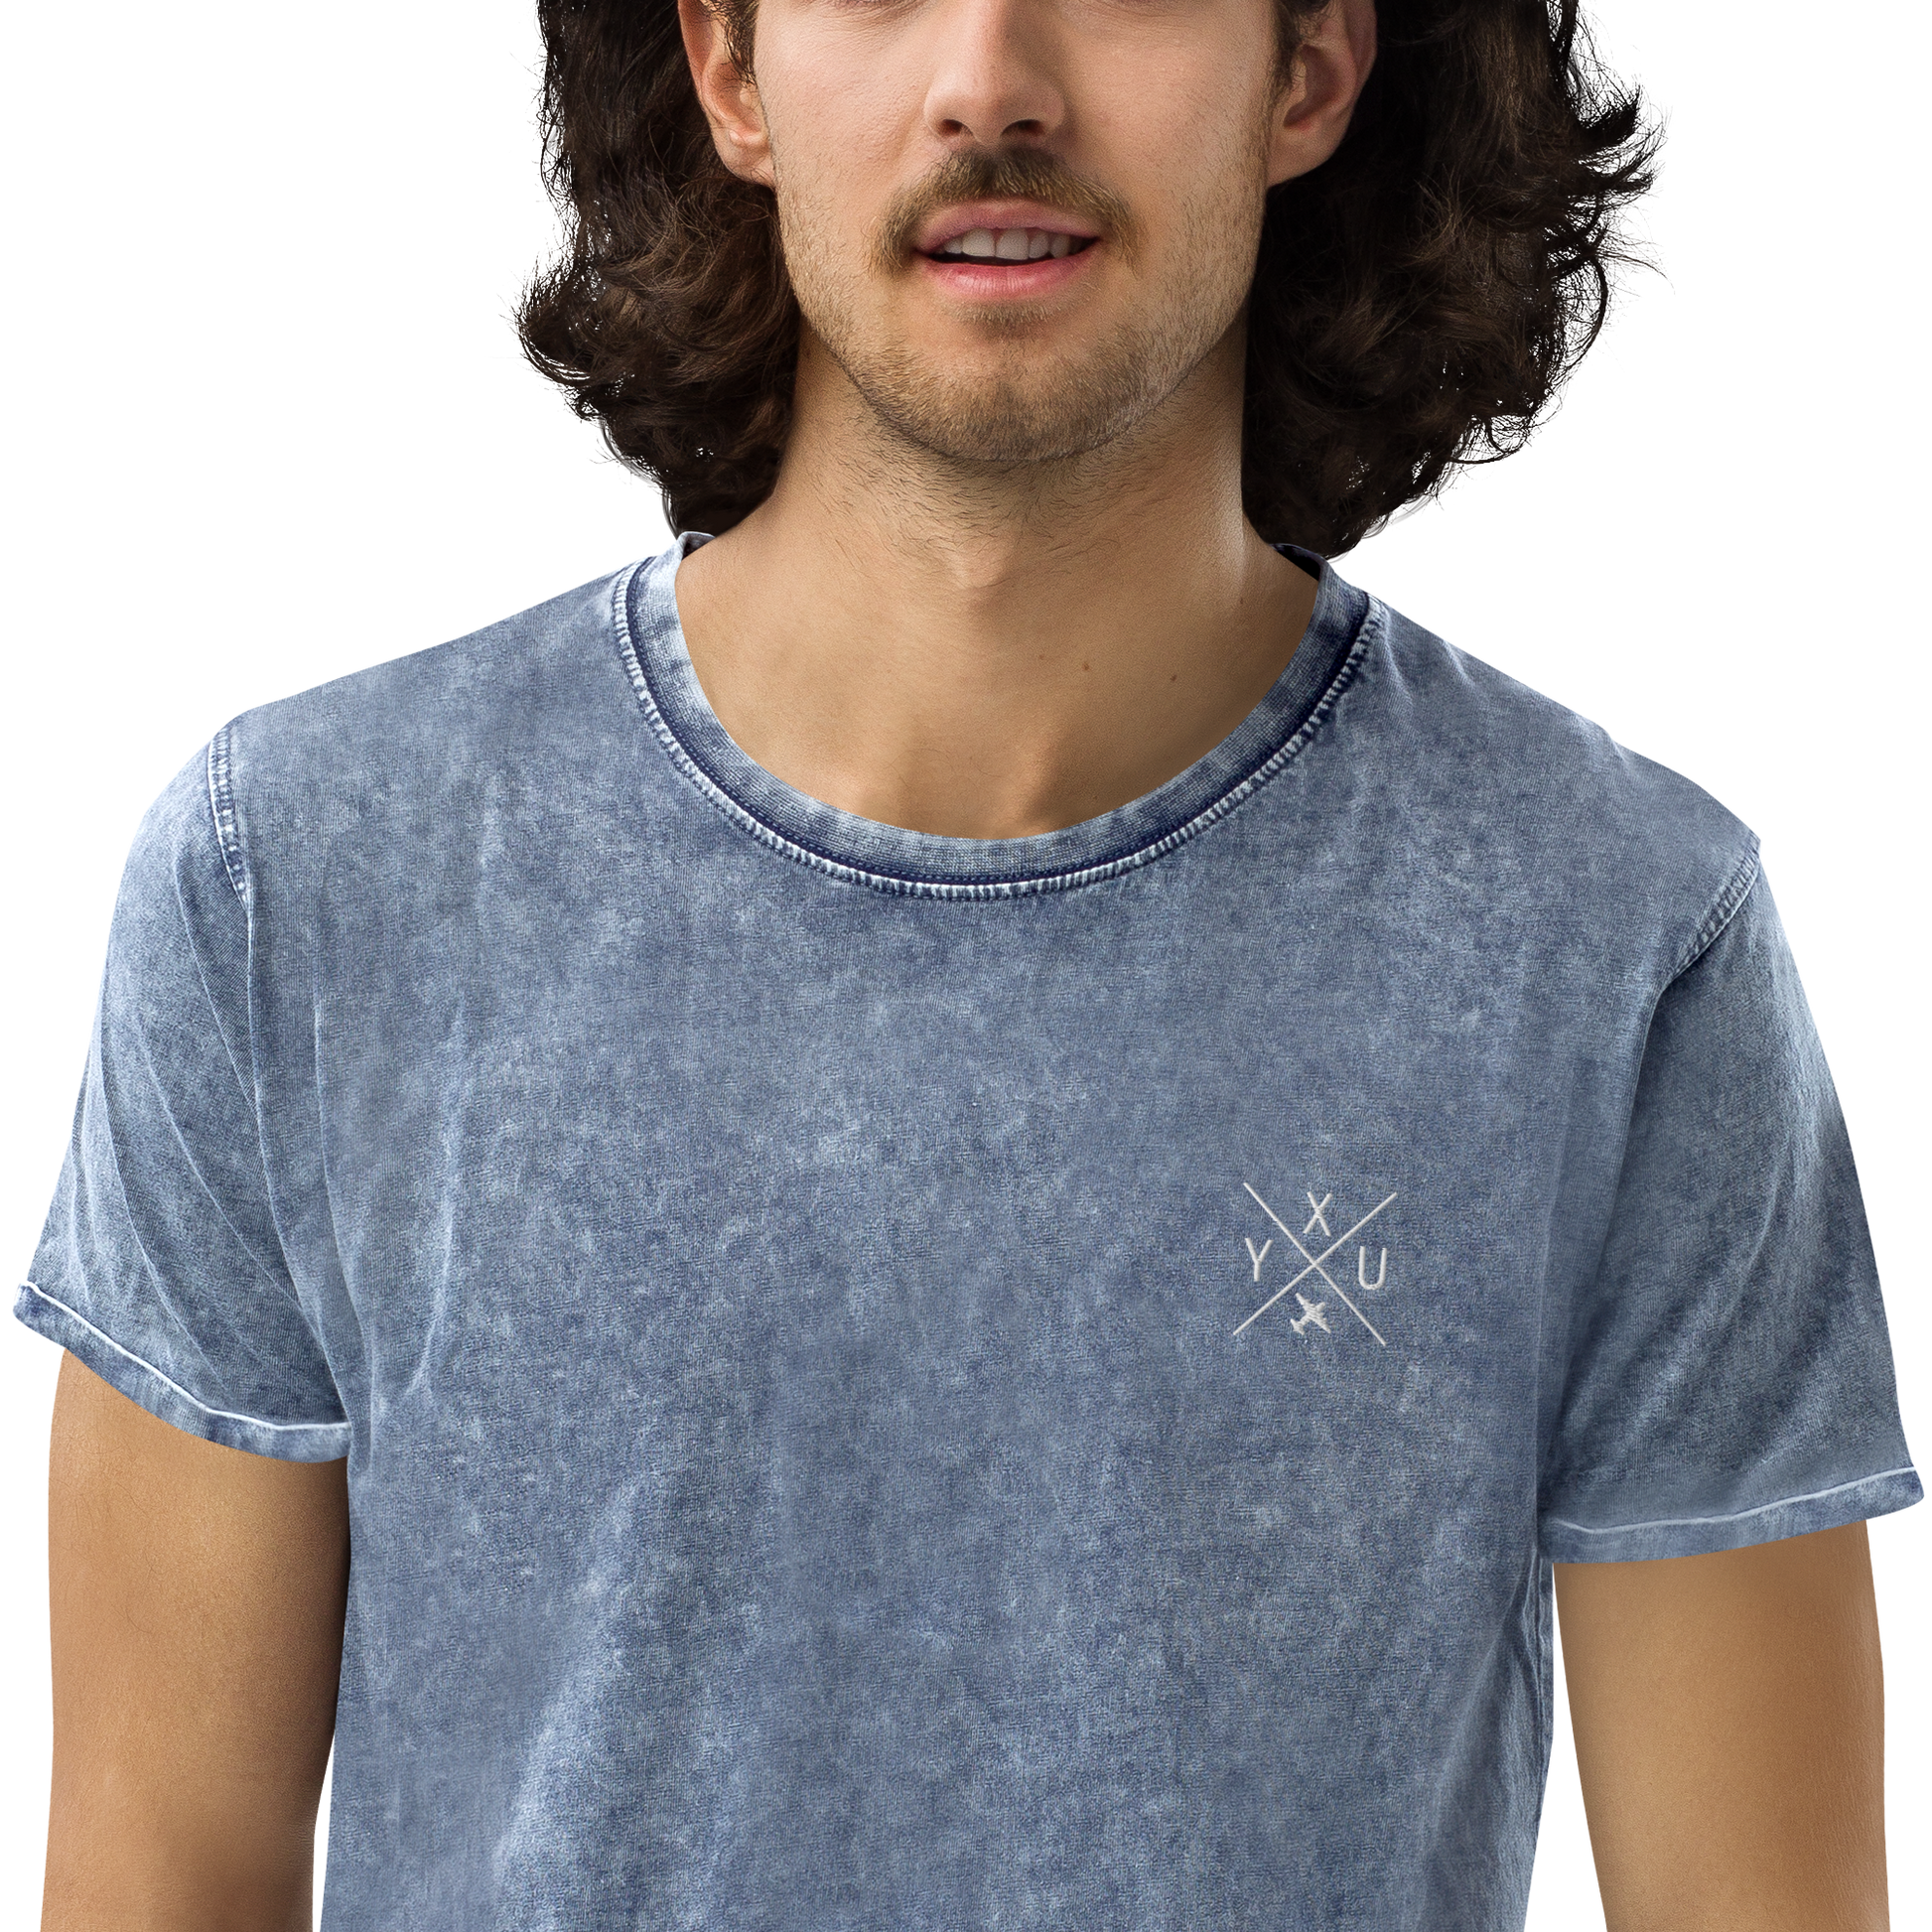 YHM Designs - YXU London Denim T-Shirt - Crossed-X Design with Airport Code and Vintage Propliner - White Embroidery - Image 12